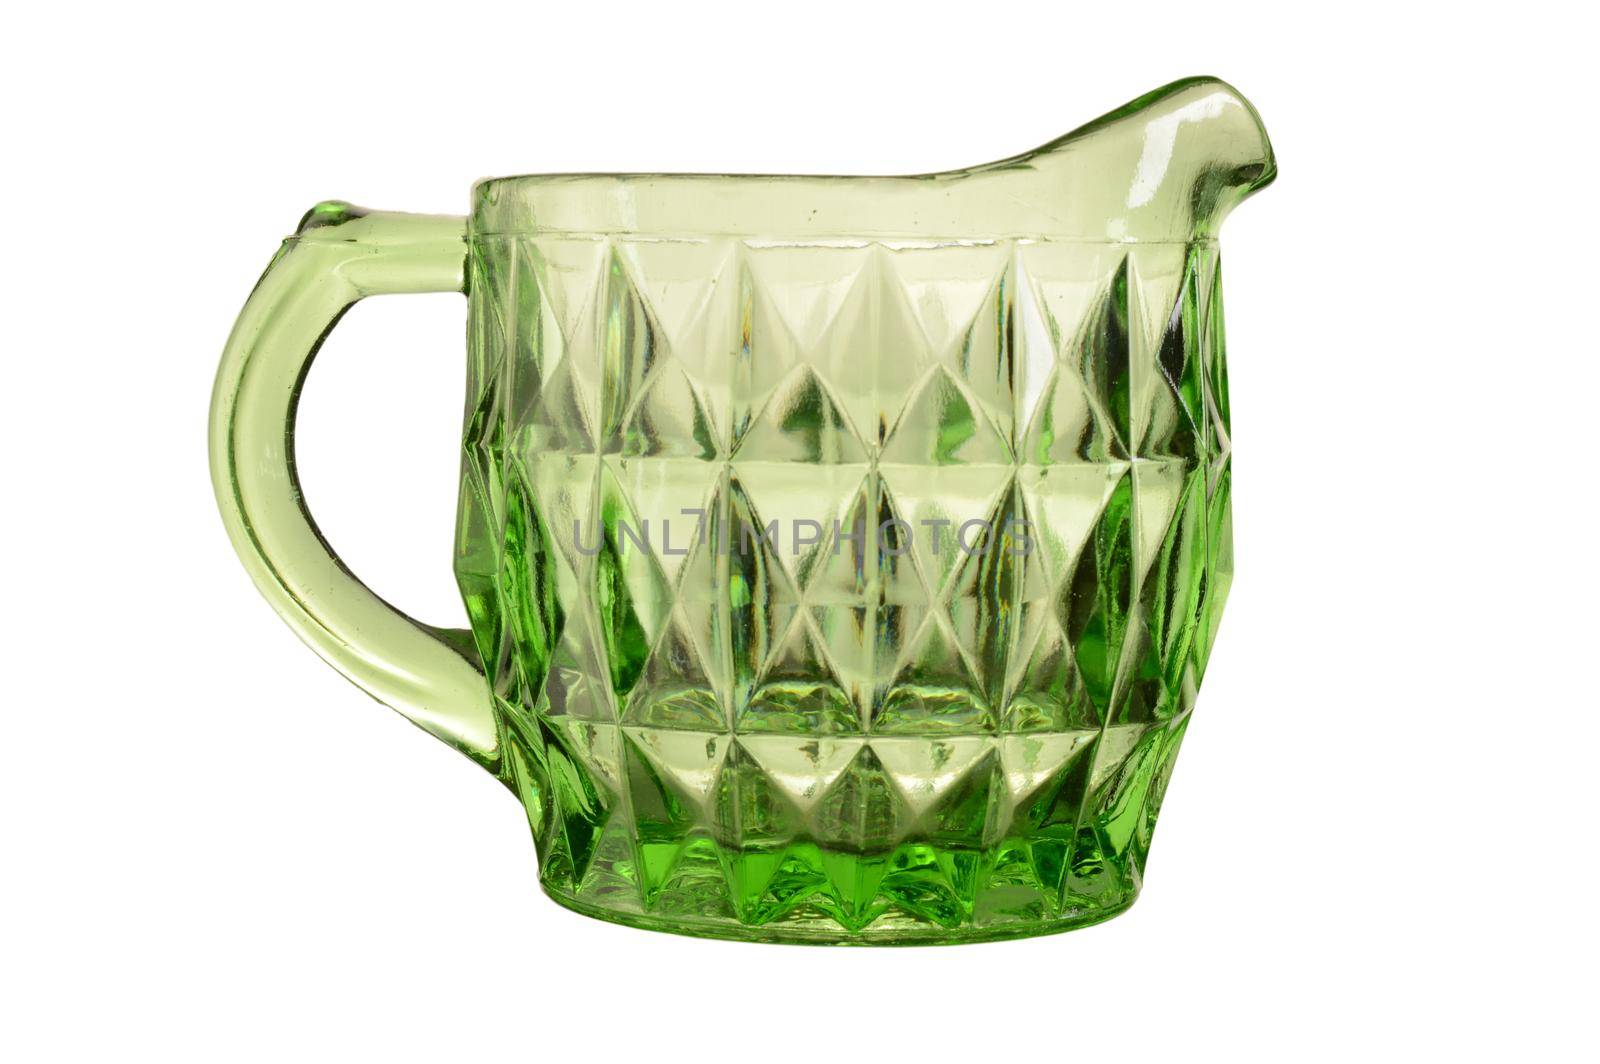 An isolated over white image of a Green Uranium Depression glass cream jug.